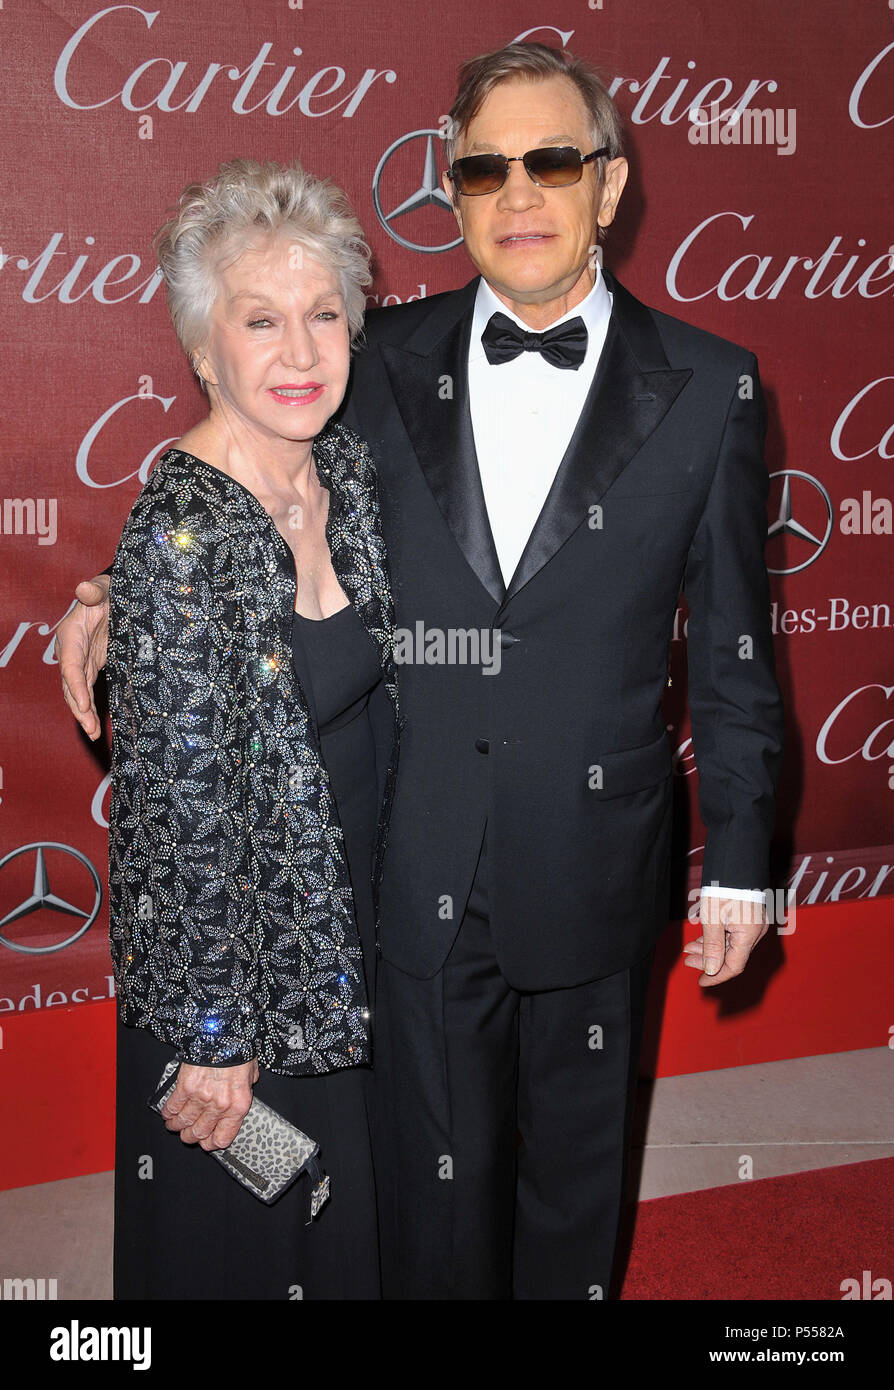 Michael York, wife Patricia McCallum - 22nd Annual Palm Springs International Film Festival Awards Gala at the Convention Center In Palm Springs.Michael York, Patricia McCallum 73 ------------- Red Carpet Event, Vertical, USA, Film Industry, Celebrities,  Photography, Bestof, Arts Culture and Entertainment, Topix Celebrities fashion /  Vertical, Best of, Event in Hollywood Life - California,  Red Carpet and backstage, USA, Film Industry, Celebrities,  movie celebrities, TV celebrities, Music celebrities, Photography, Bestof, Arts Culture and Entertainment,  Topix, vertical,  family from from t Stock Photo